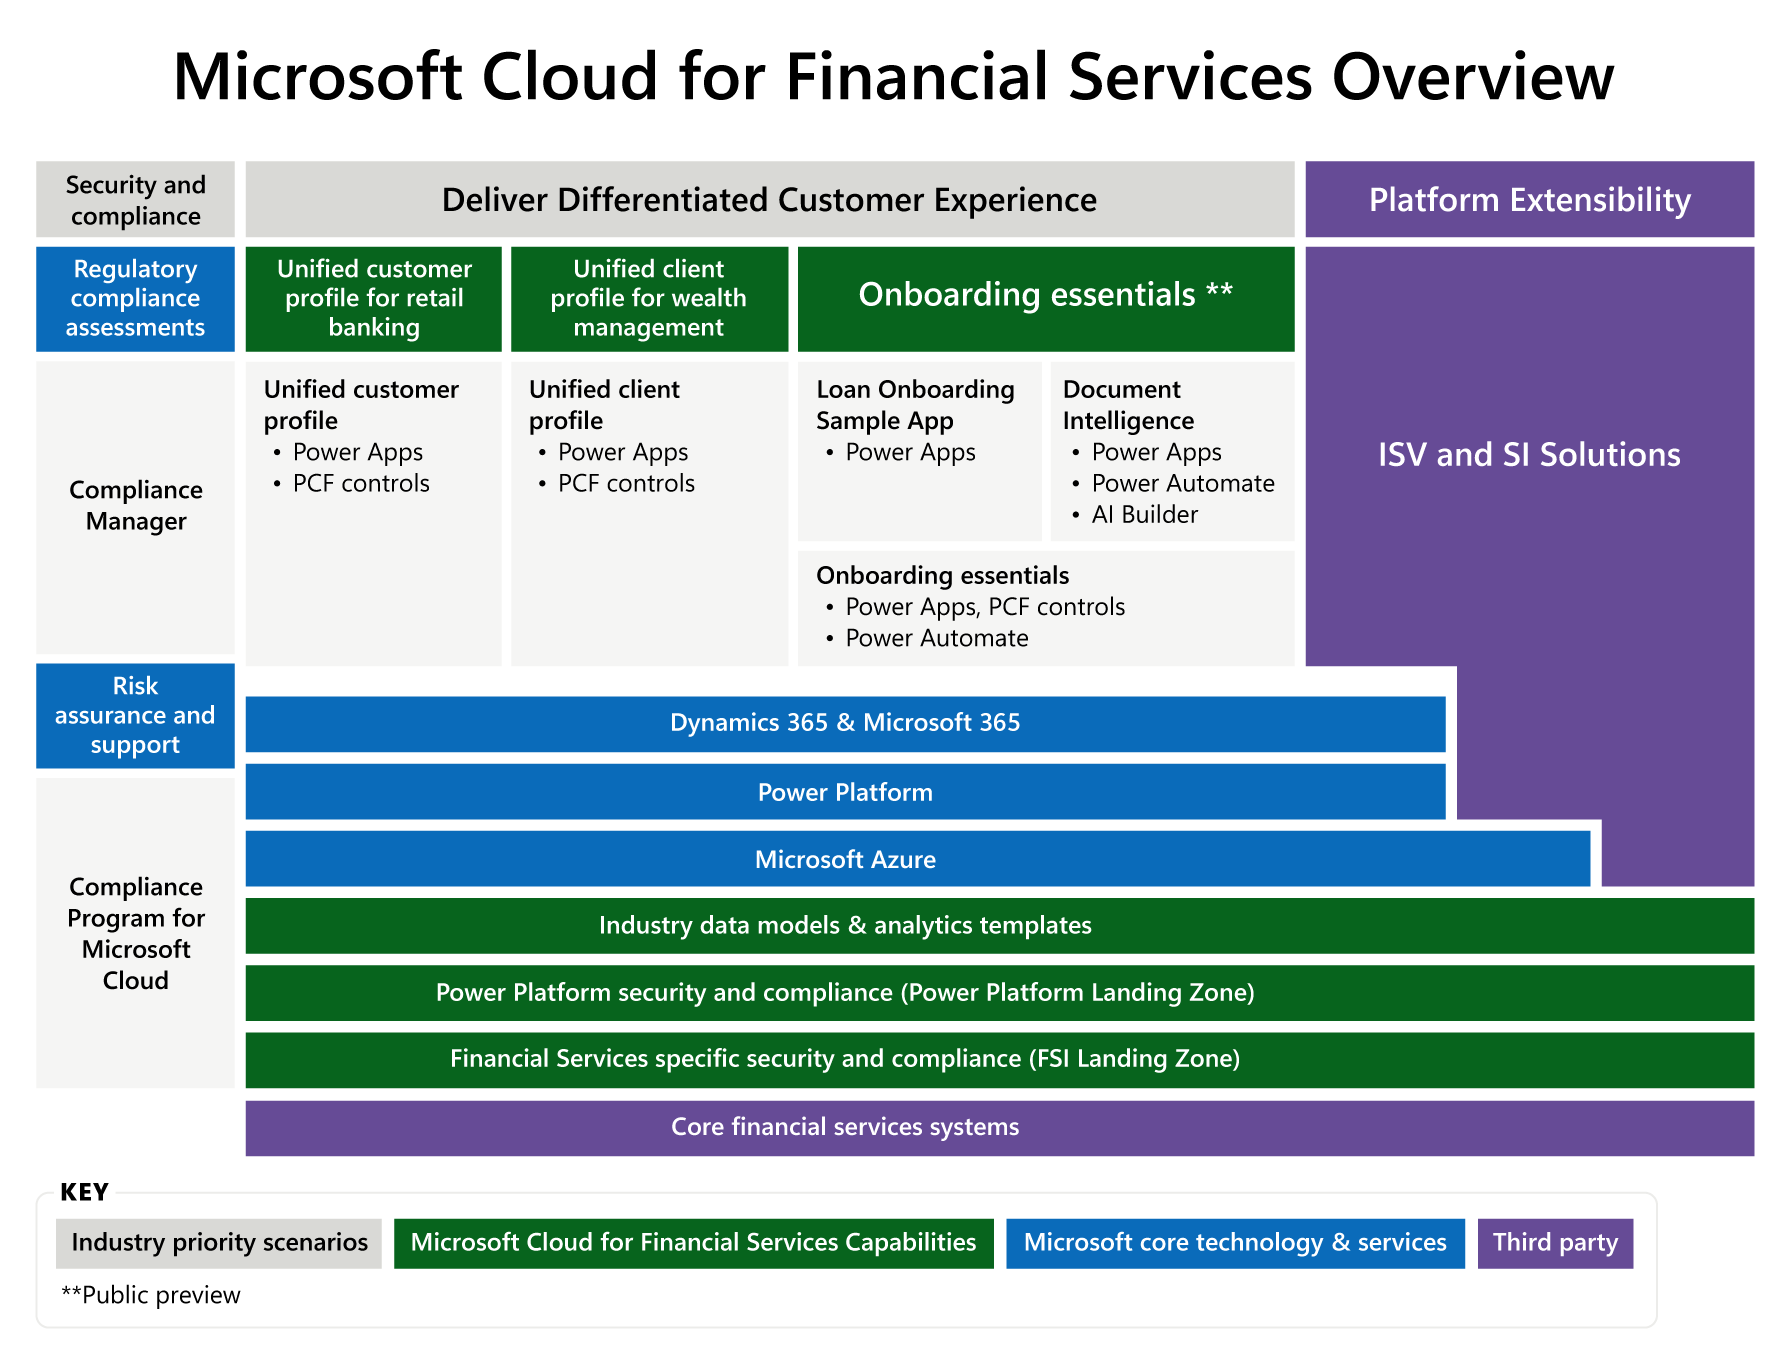 What are Intelligent Recommendations? - Microsoft Cloud for Retail